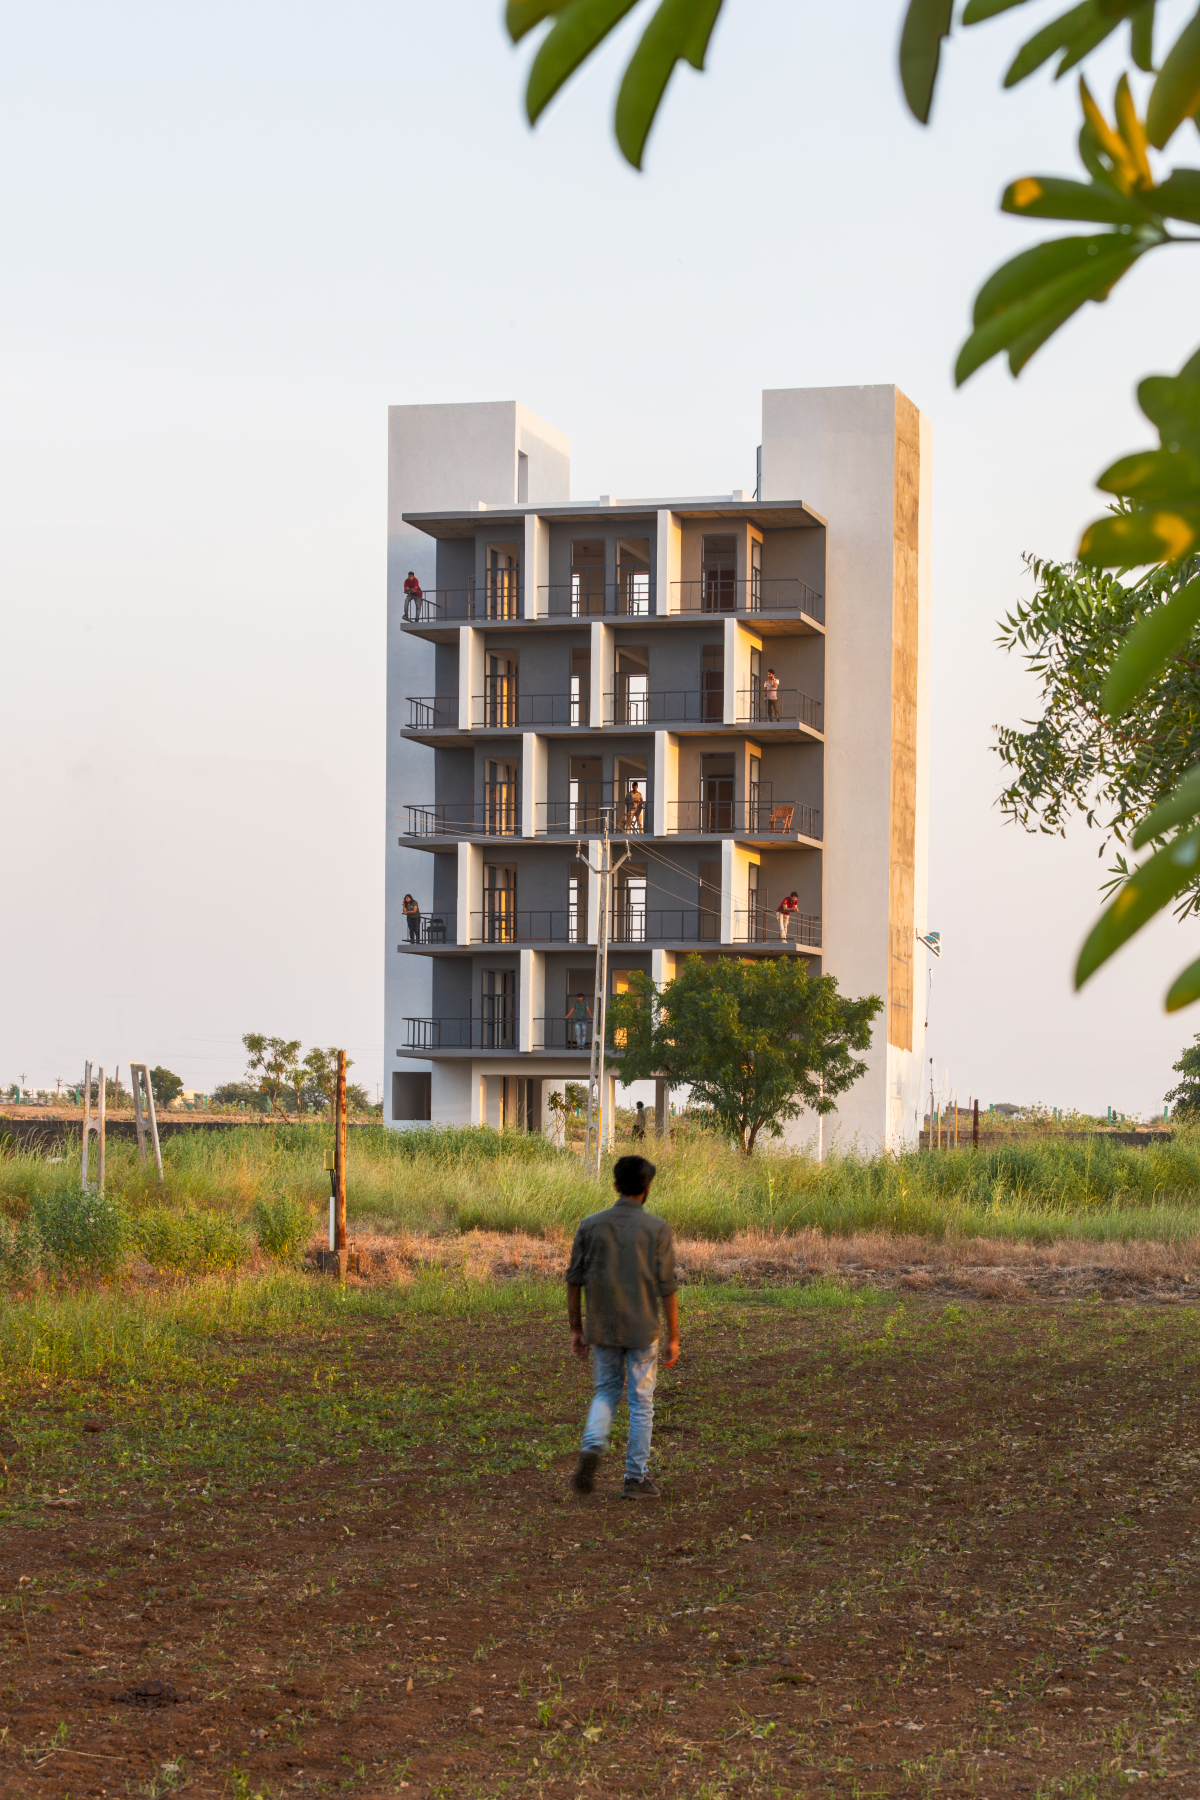 The Flying Walls Hostel, at Rajkot, Gujarat, by Dhulia Architecture Design Studio 20